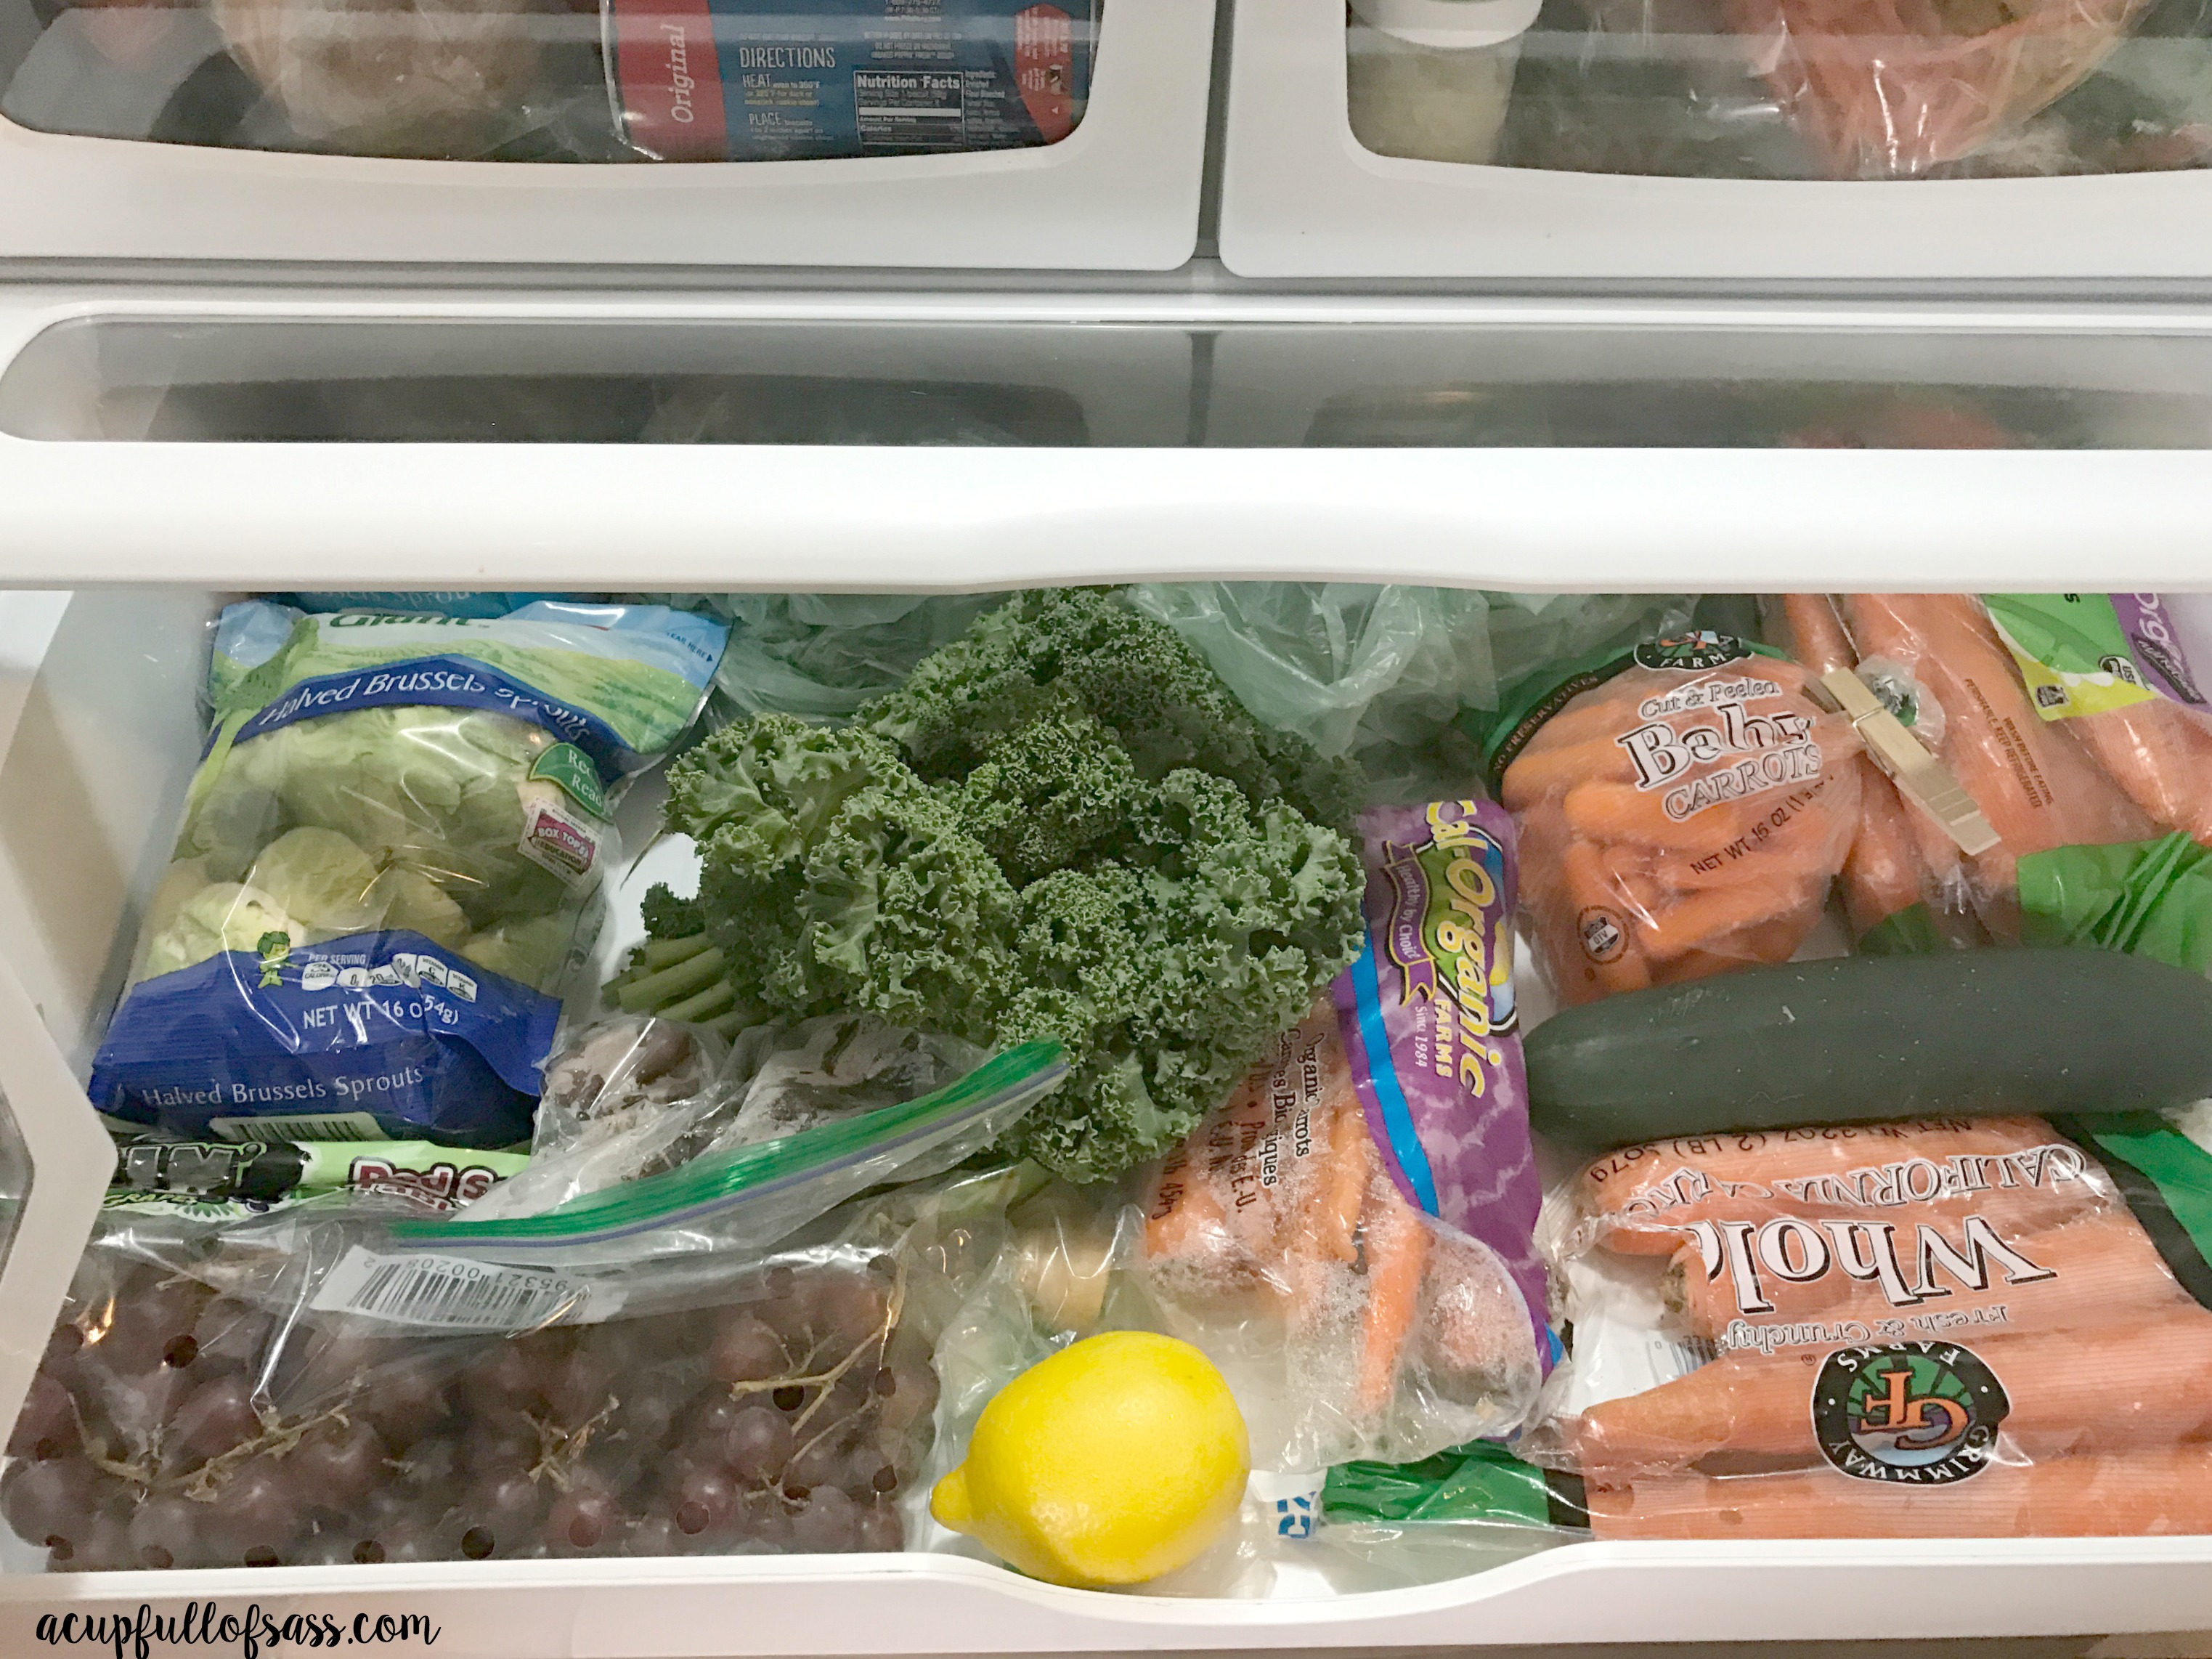 What I eat and how I organize my refrigerator.